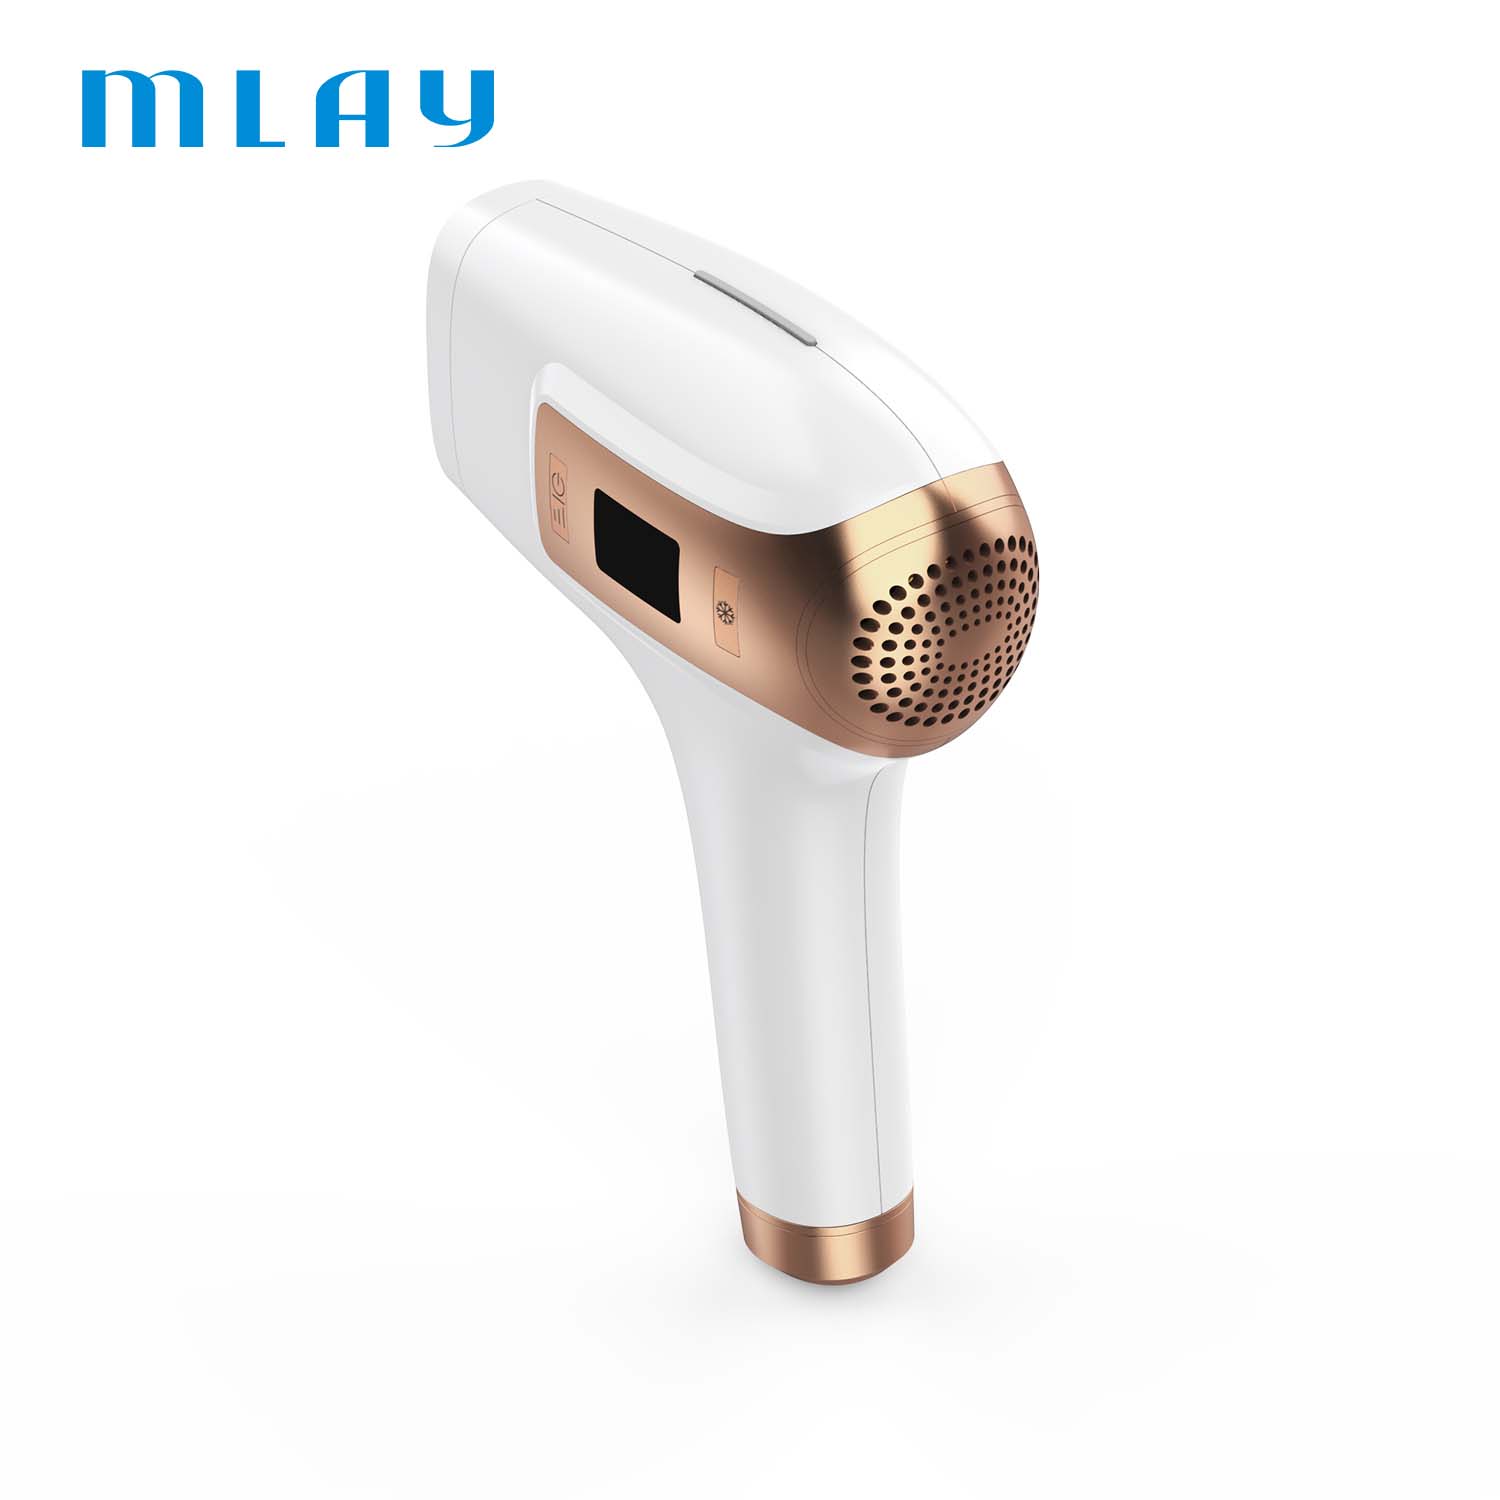 MLAY Popular Mini Portable Face Leg Back Bikini Hair Removal Machine From Home Painless Permanent With Cooling Ice Sensing